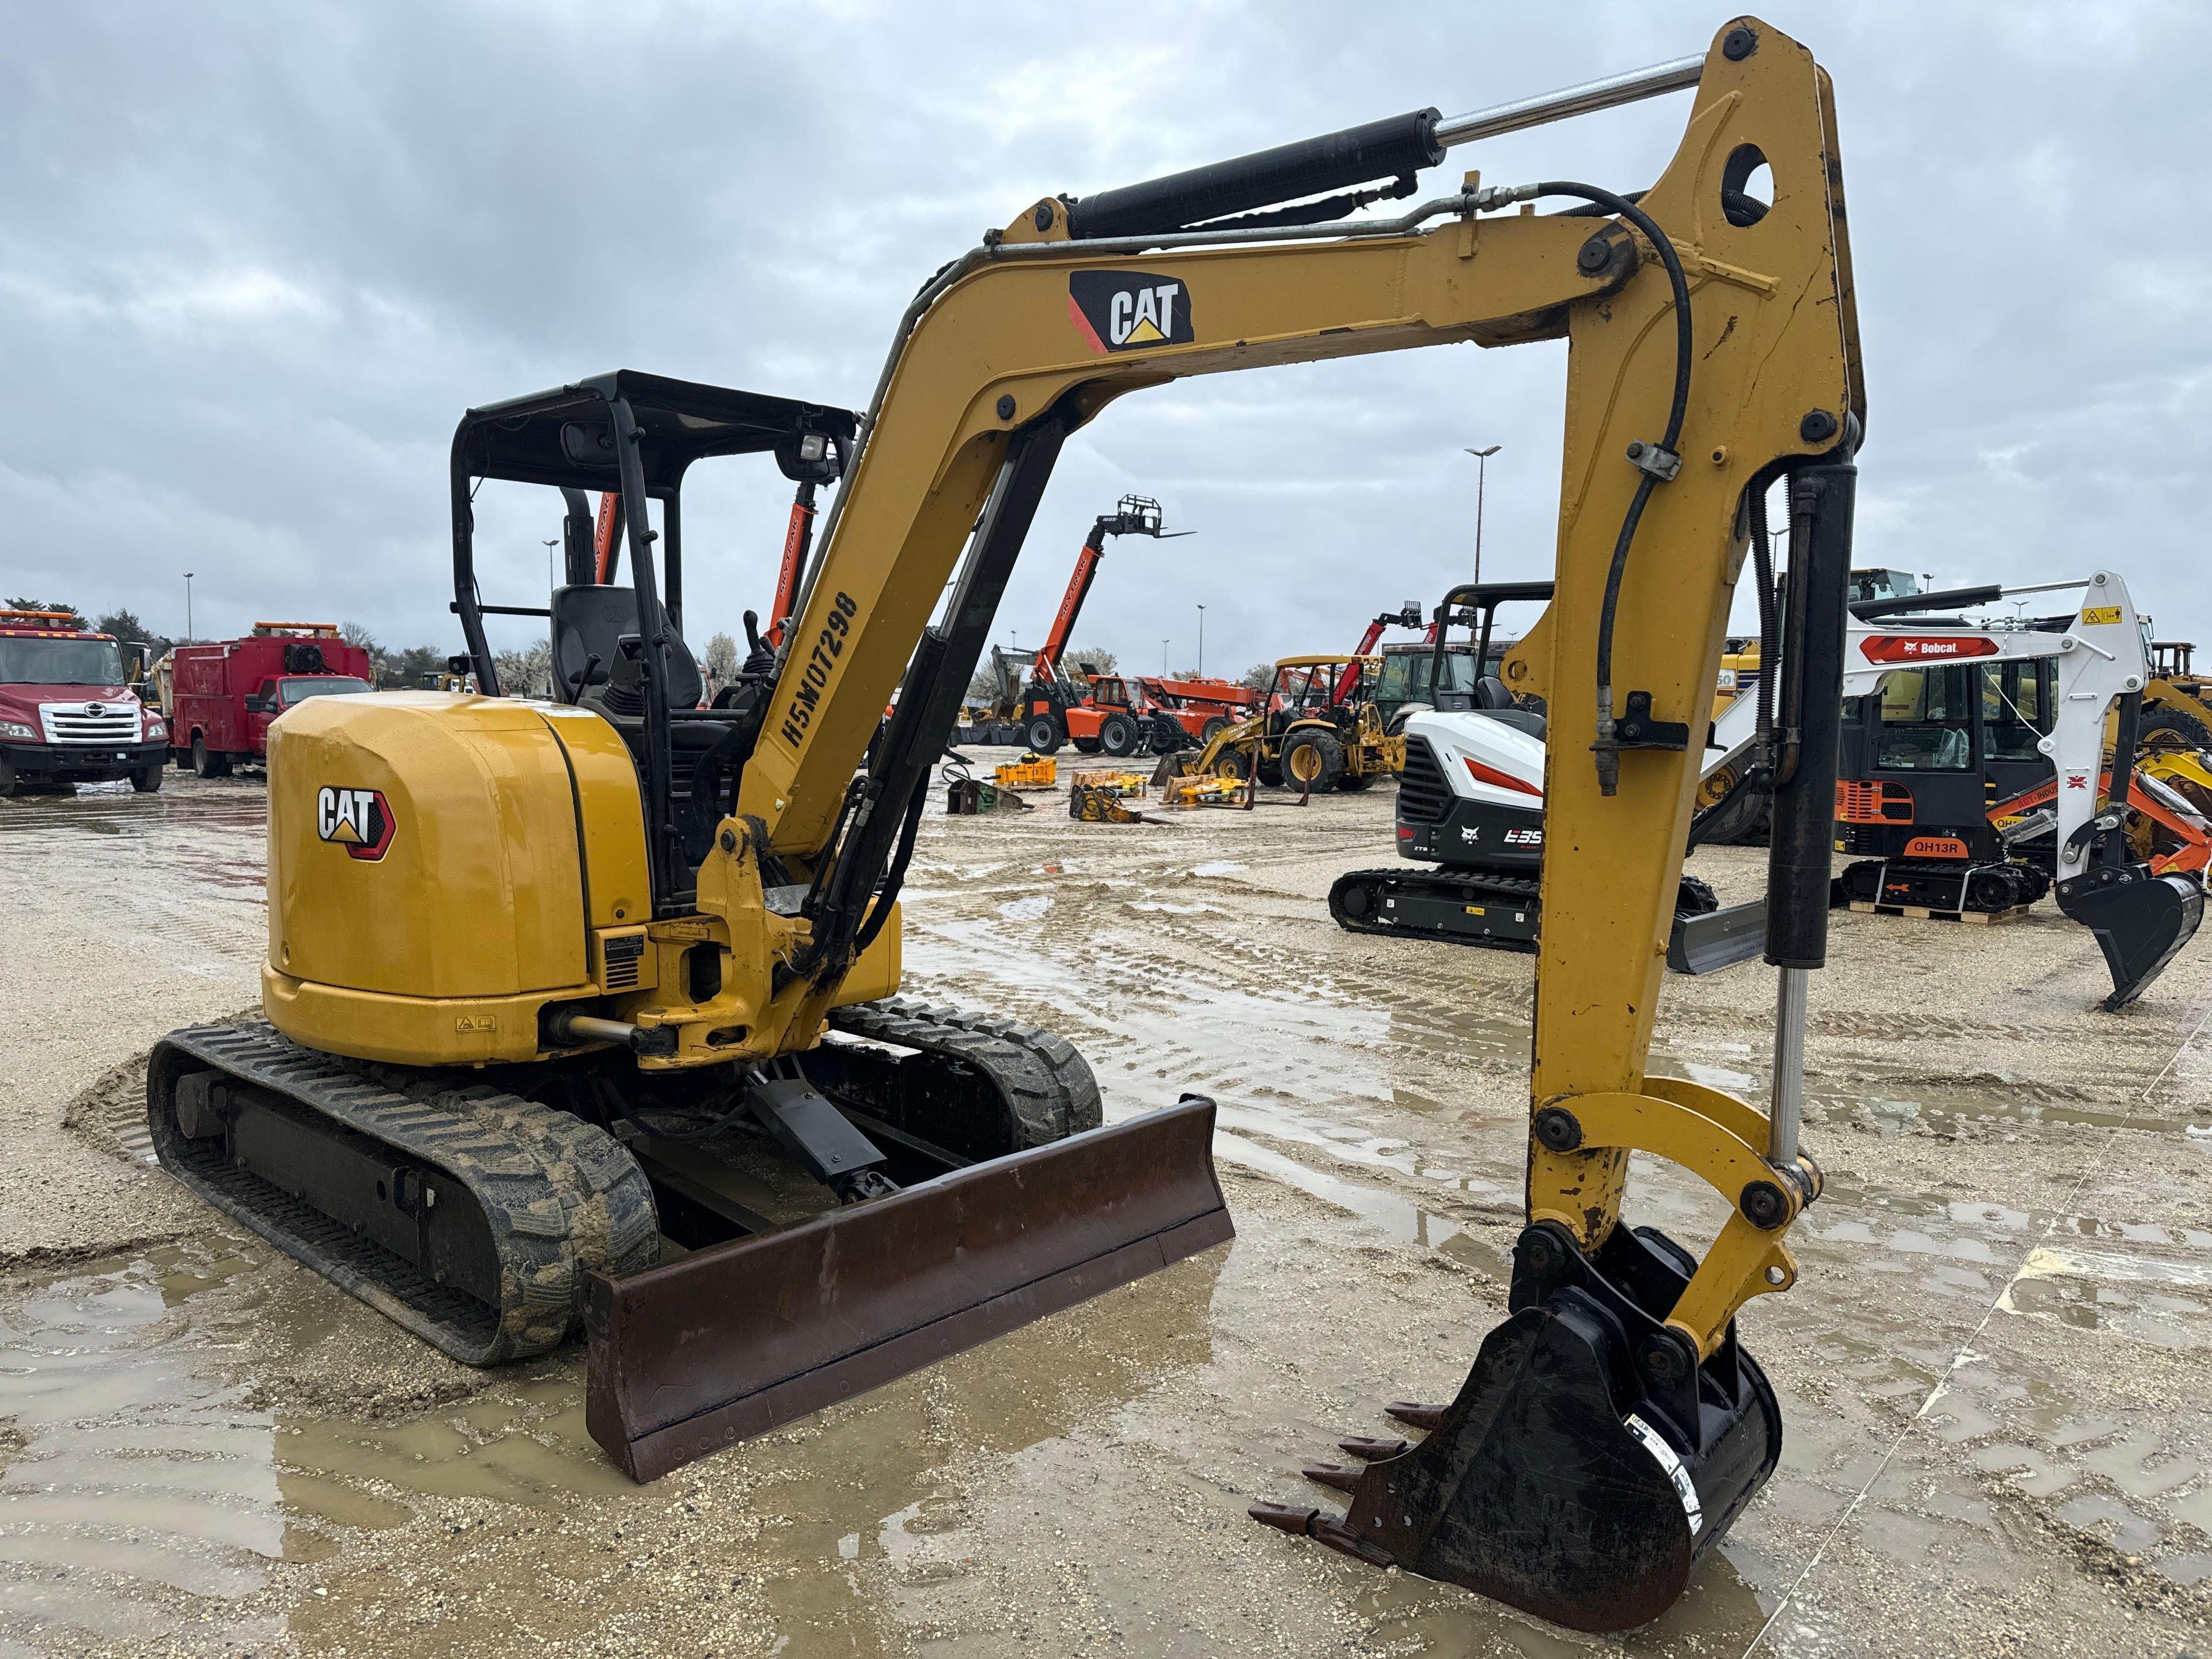 2018 CAT 305E2CR HYDRAULIC EXCAVATOR SN:H5M07298 powered by Cat diesel engine, equipped with Cab,